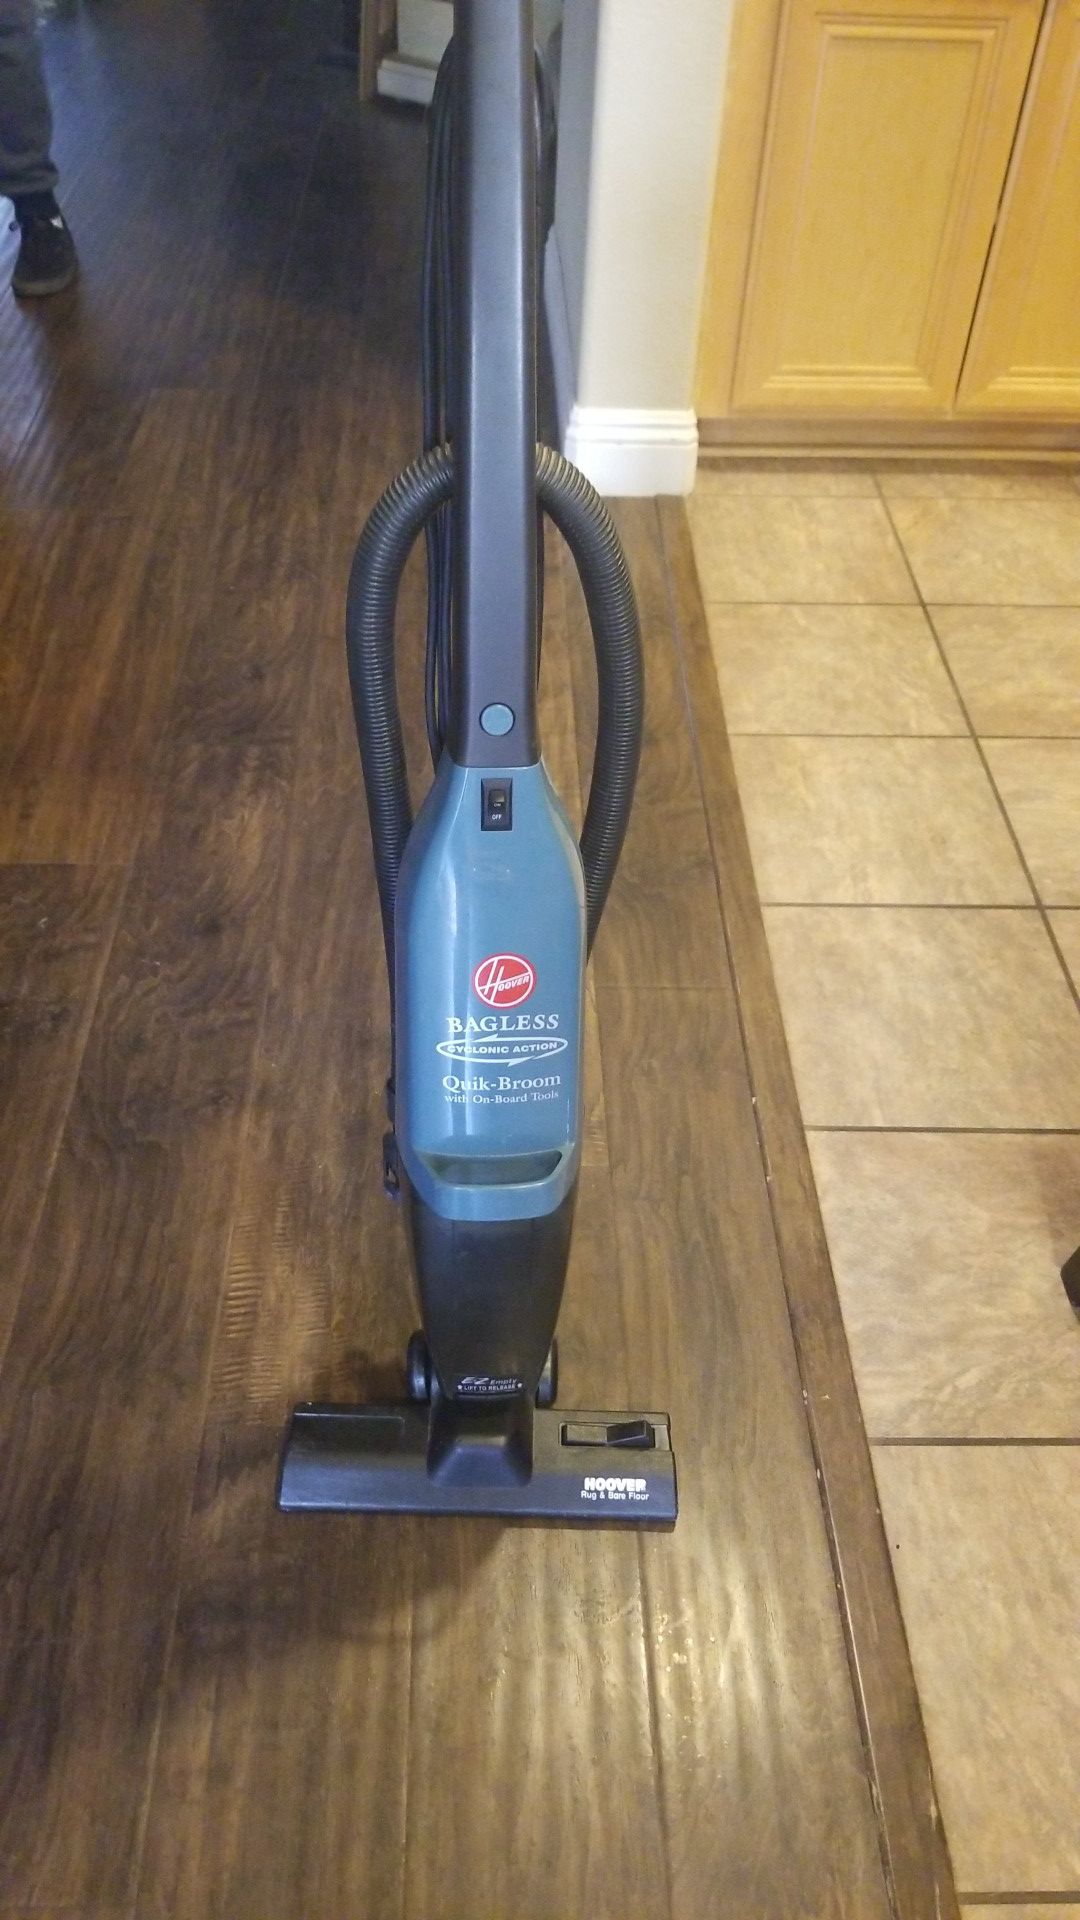 Hoover backless vacuum cleaner